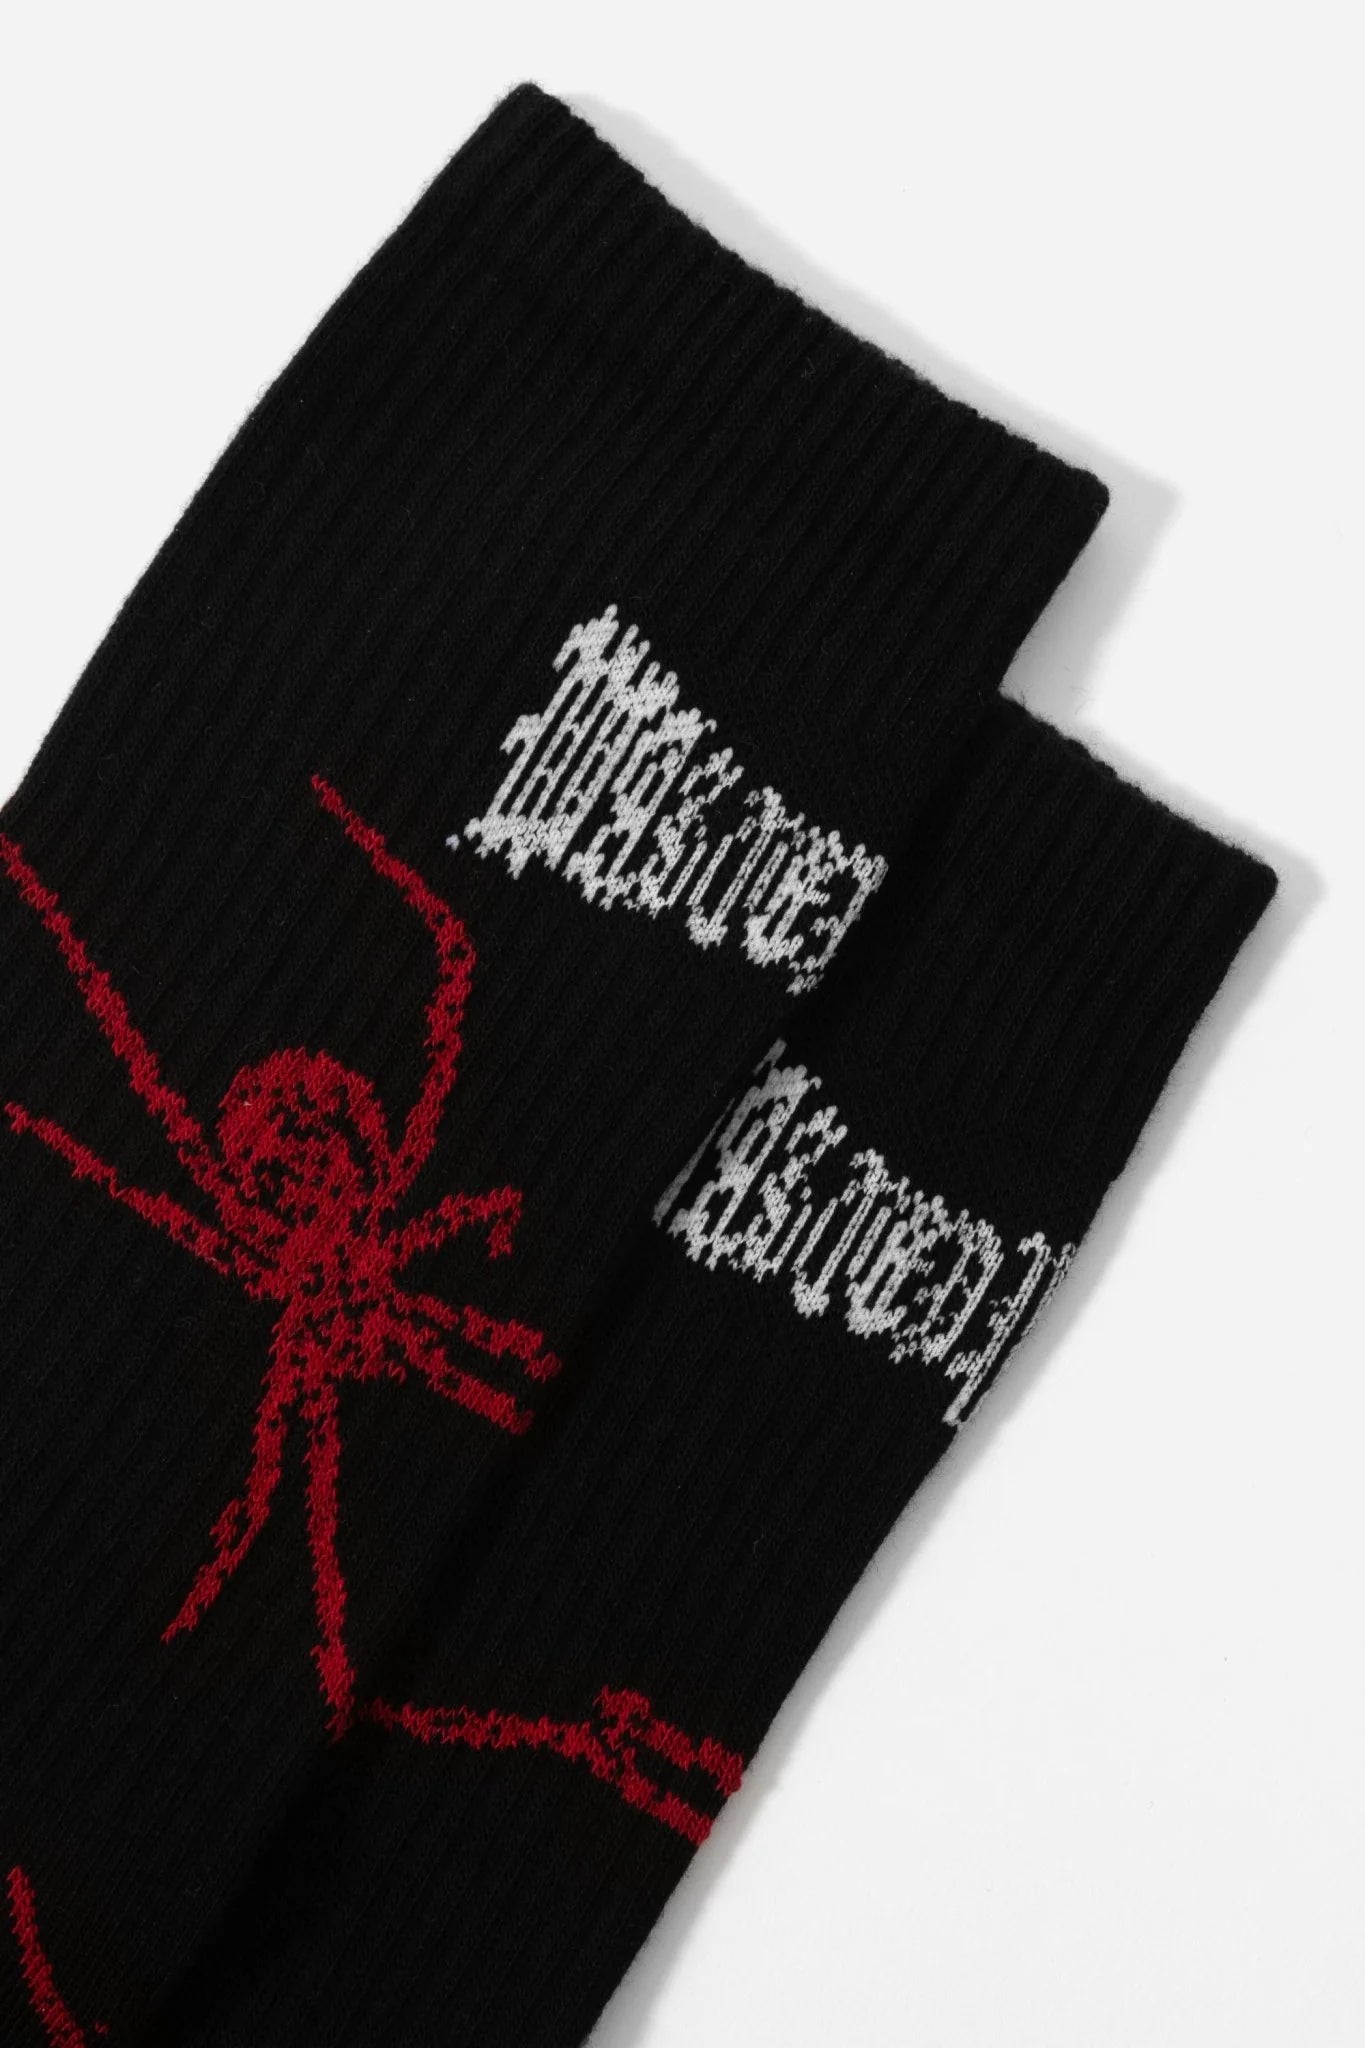 WASTED PARIS - PHOBIA SOCK - BLACK/RED